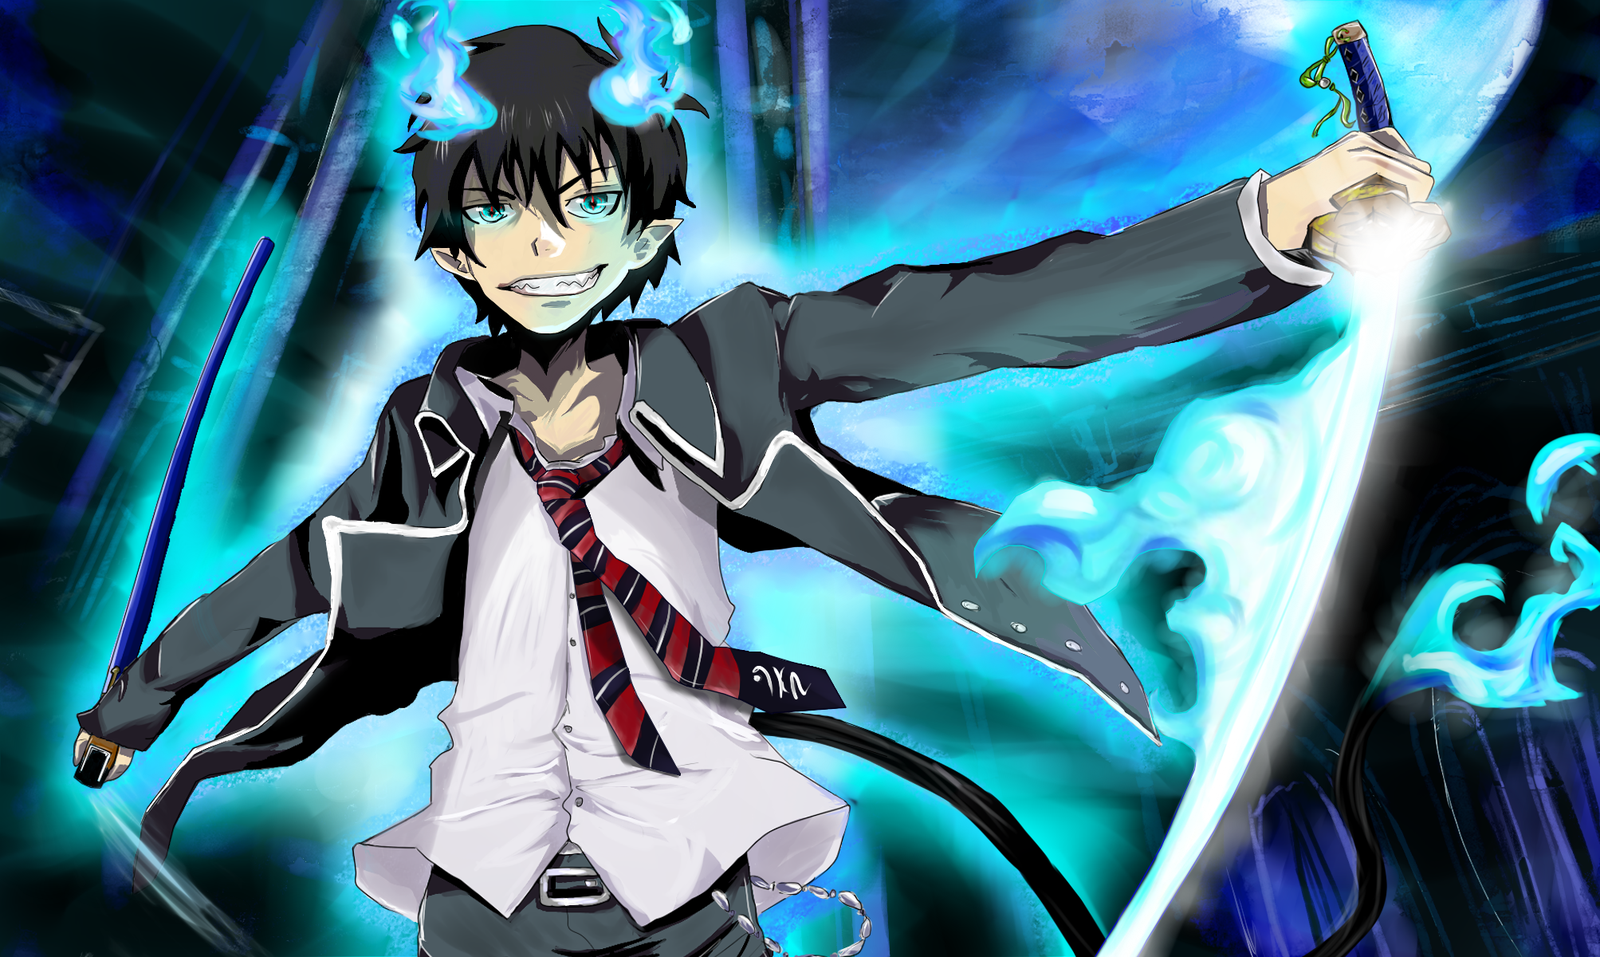 6. "Rin Okumura from Blue Exorcist" - wide 8